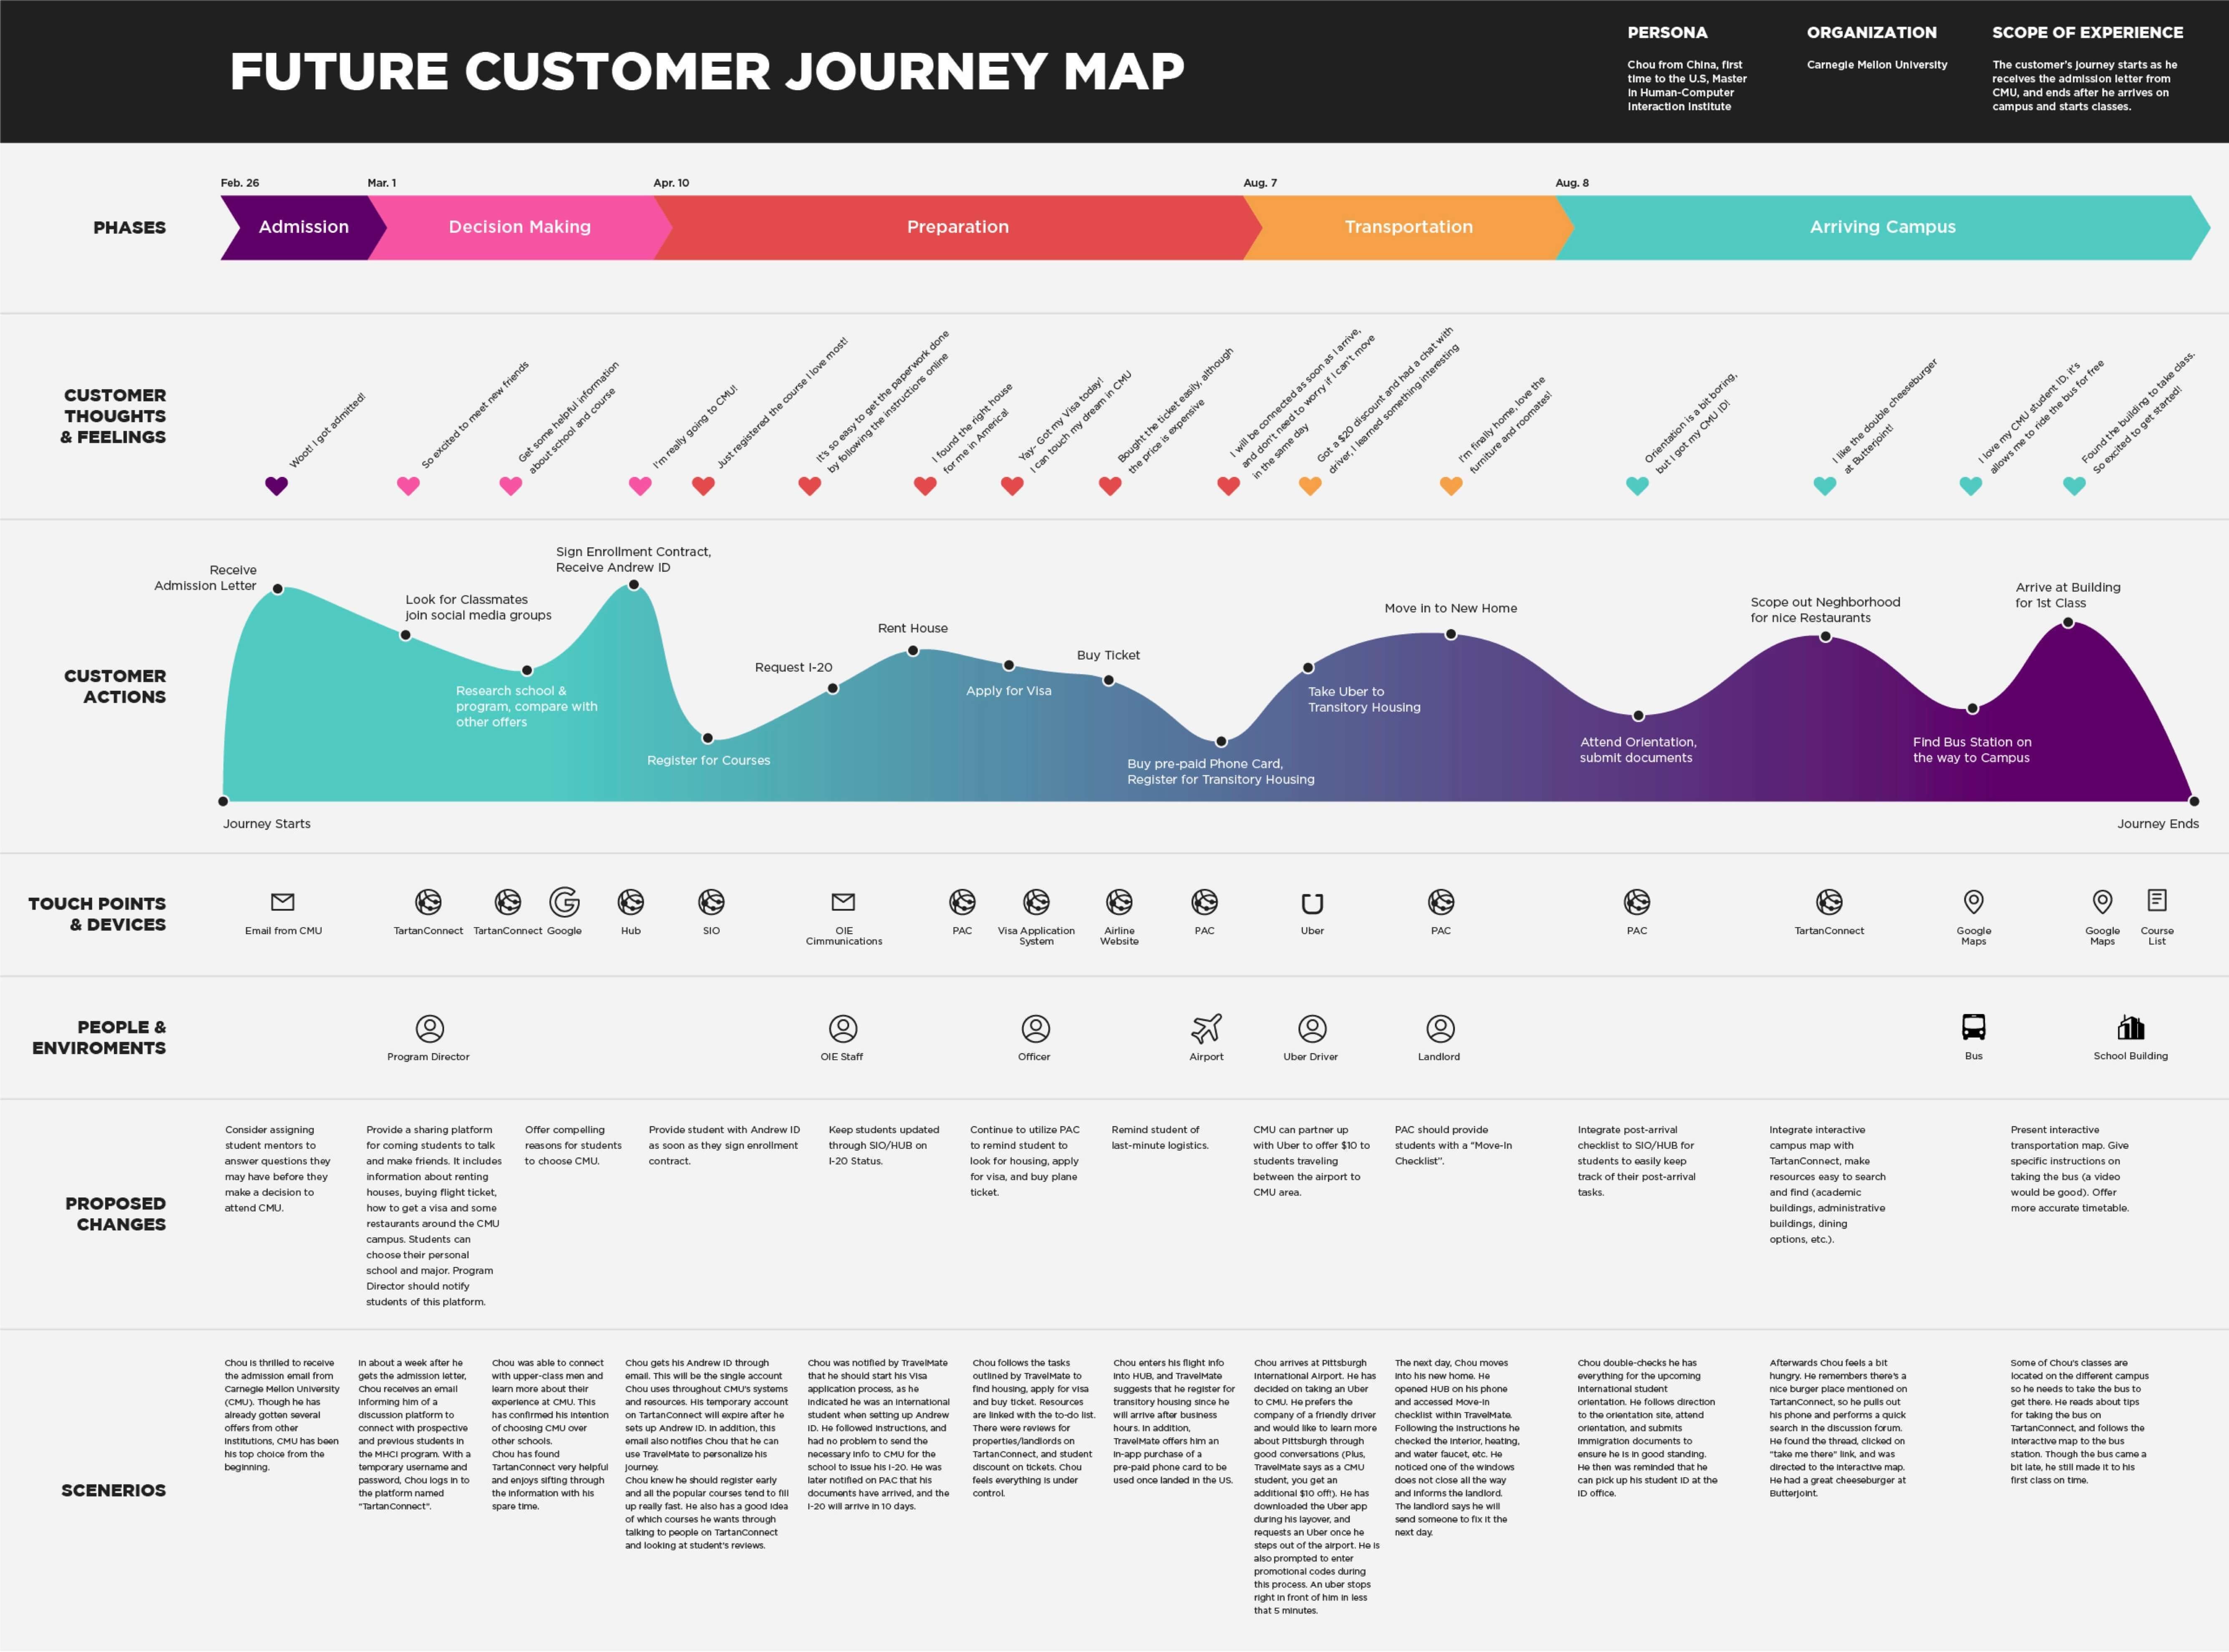 May journey. Journey Map. Инфографика customer Journey. Customer Journey Map дизайнерские. Customer Journey Map шаблон.